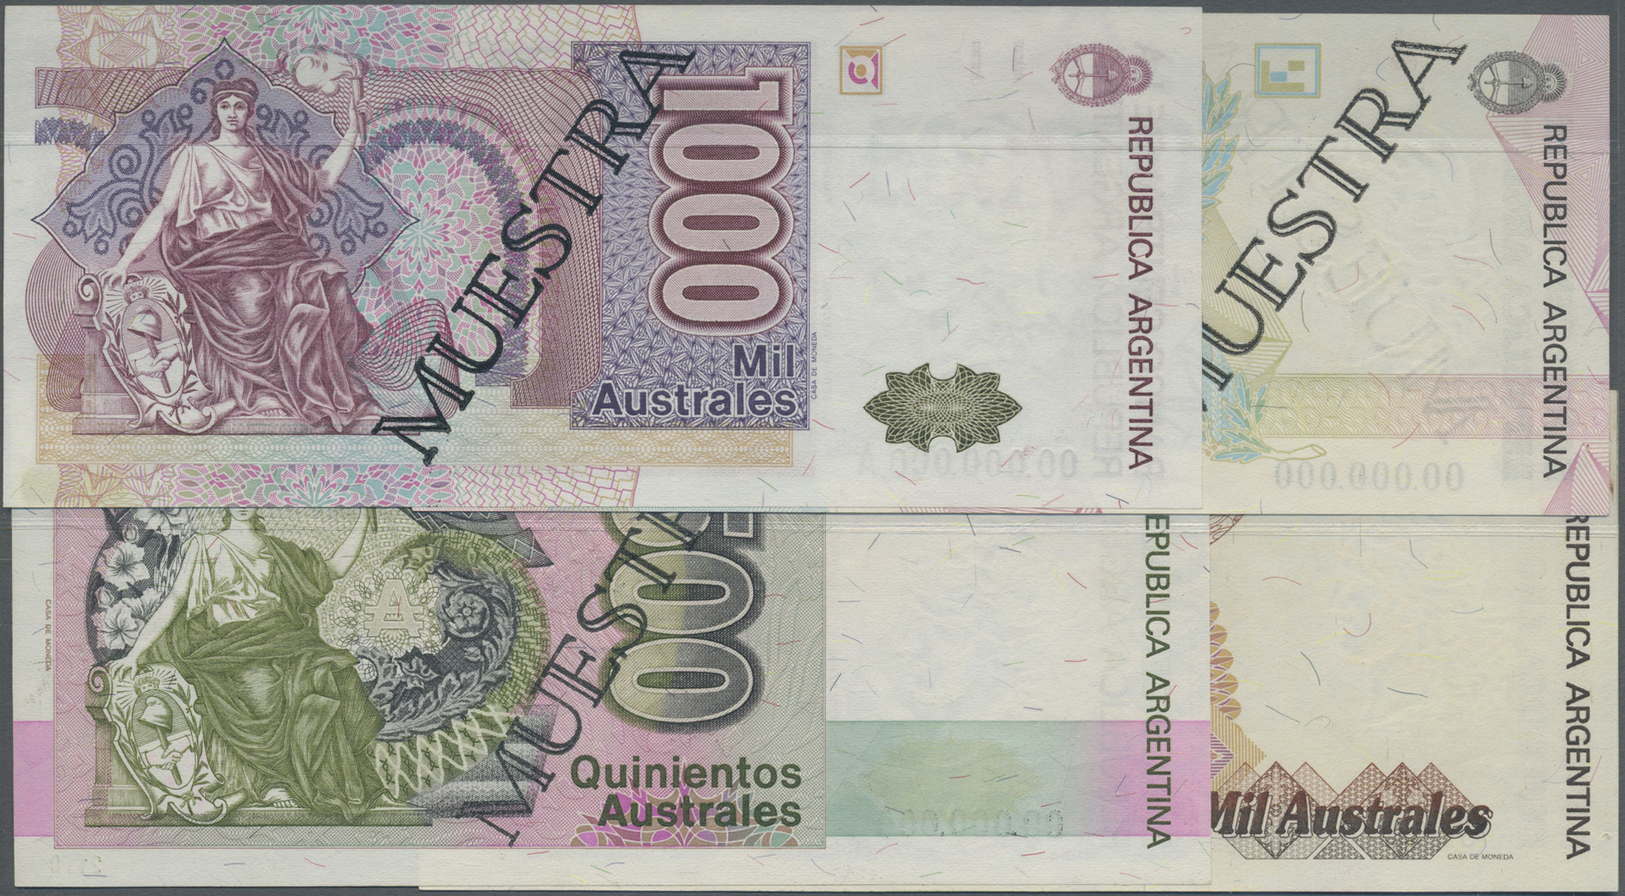 00044 Argentina / Argentinien: Set Of 8 Specimen Banknotes From 5 To 500.000 Australes P. 324s-329s, 337s, 338s, The 338 - Argentine